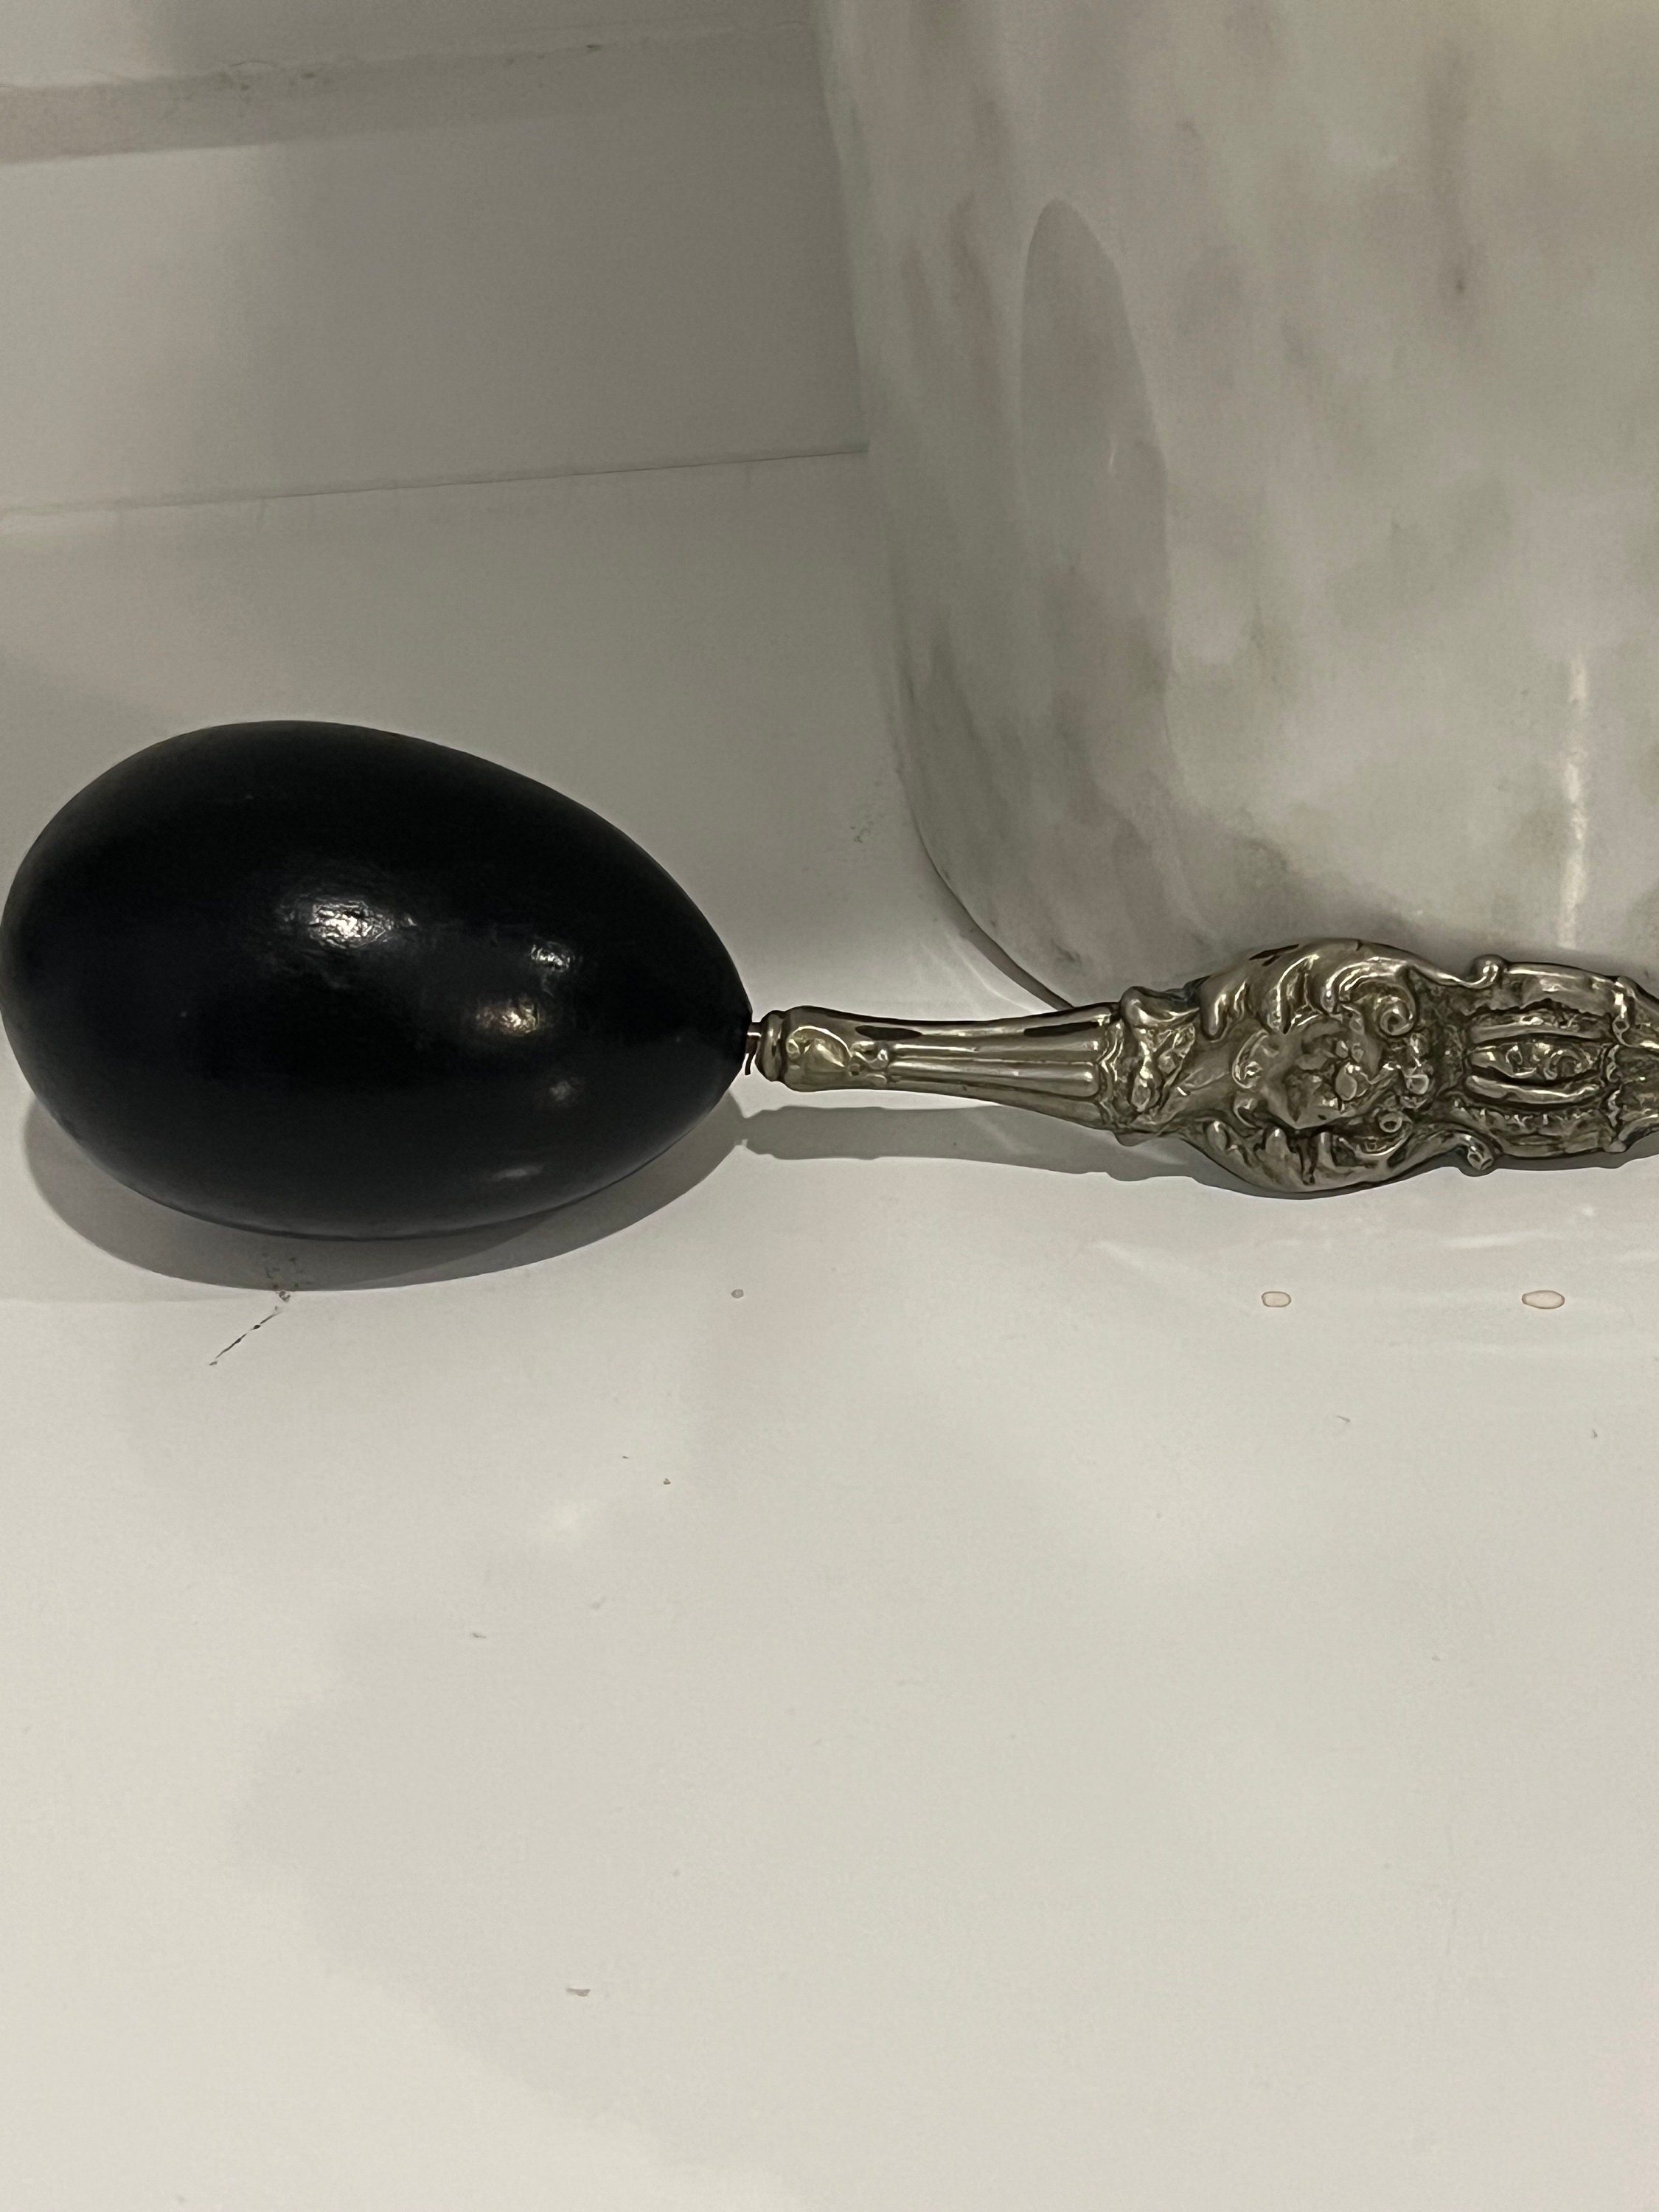 Vintage Black Darning Egg With Handle. for Darning Socks or for Sewing  Display of Vintage Implements. Well Used Darning Egg. 